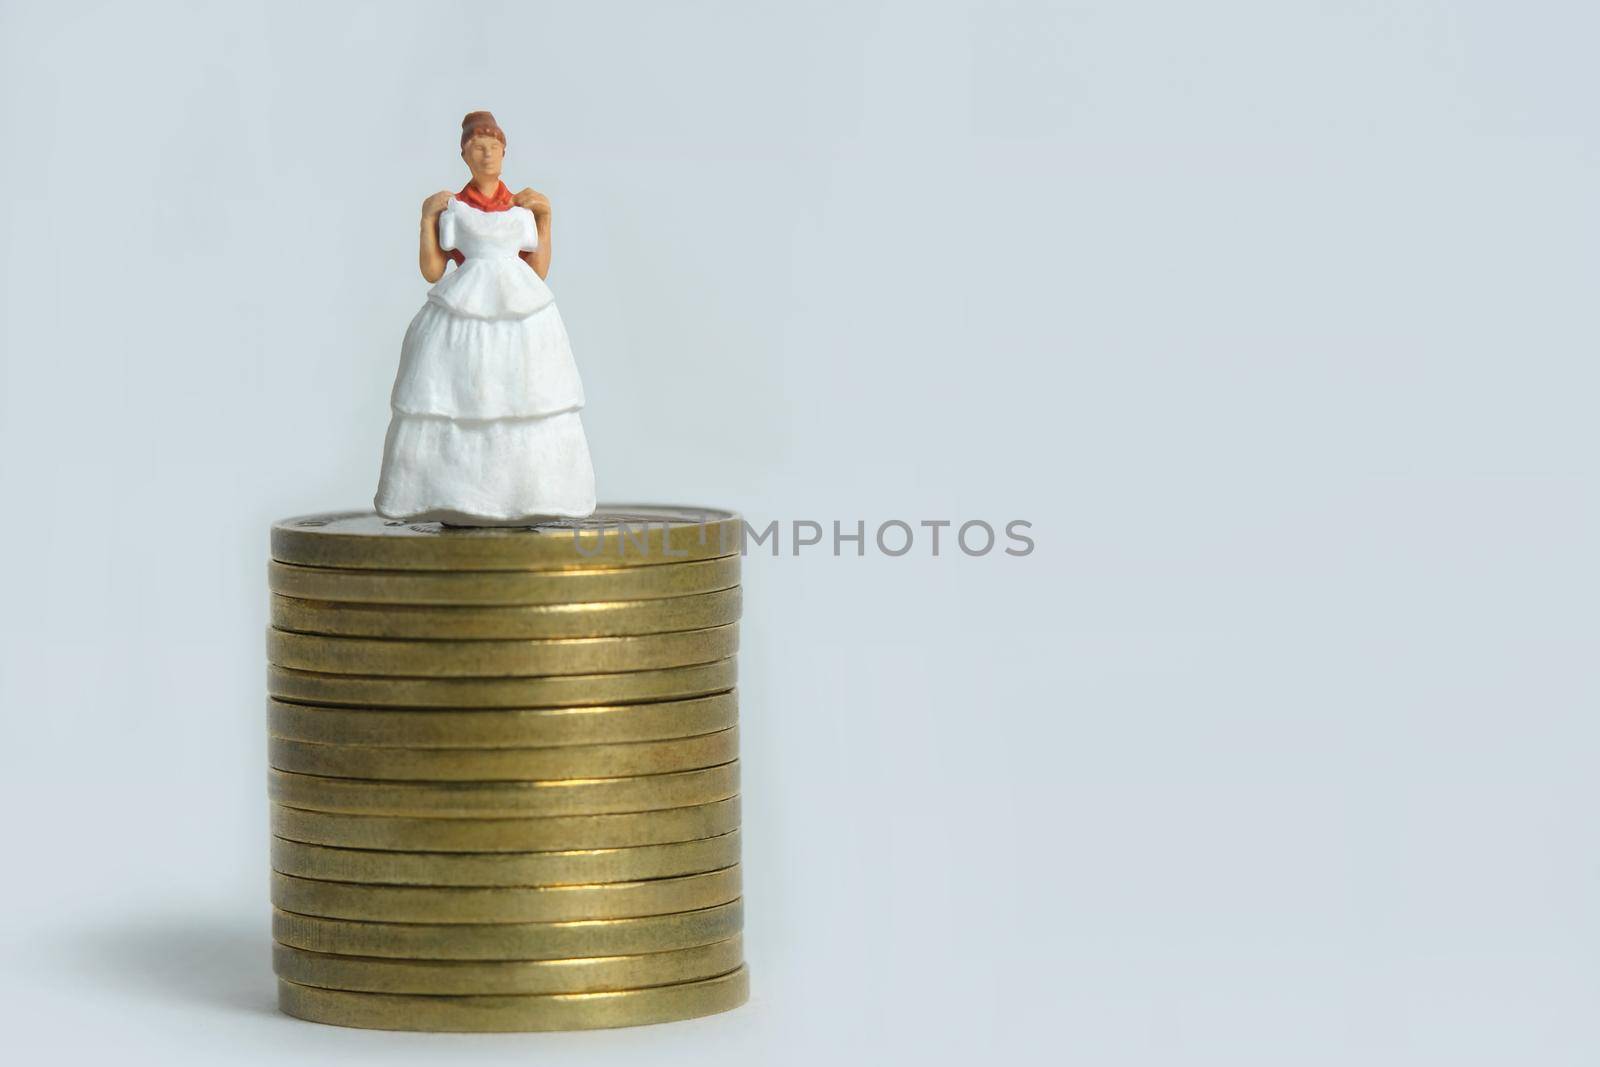 Wedding dress budget for bride, miniature people illustration concept. Woman standing above coin money stack. Image photo by Macrostud